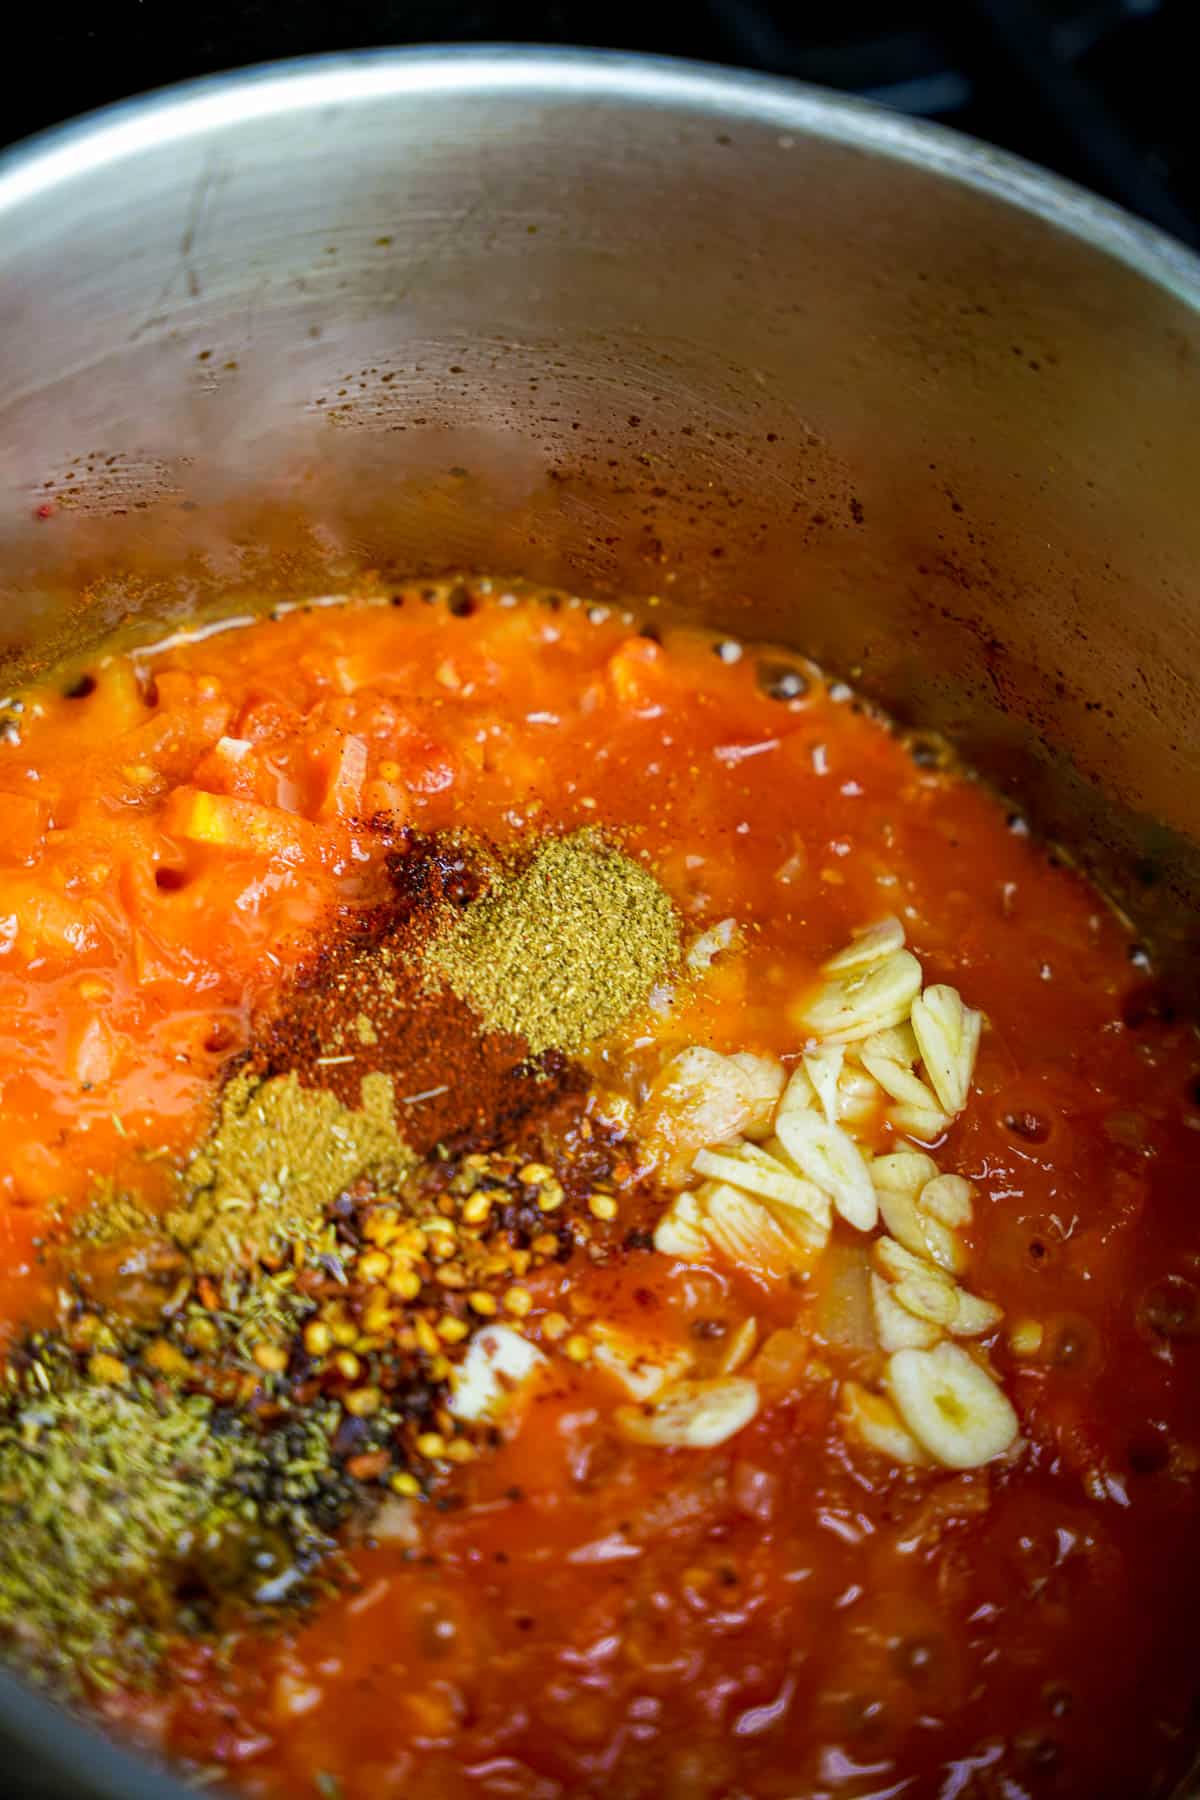 Garlic and spices are added to the coking sauce.